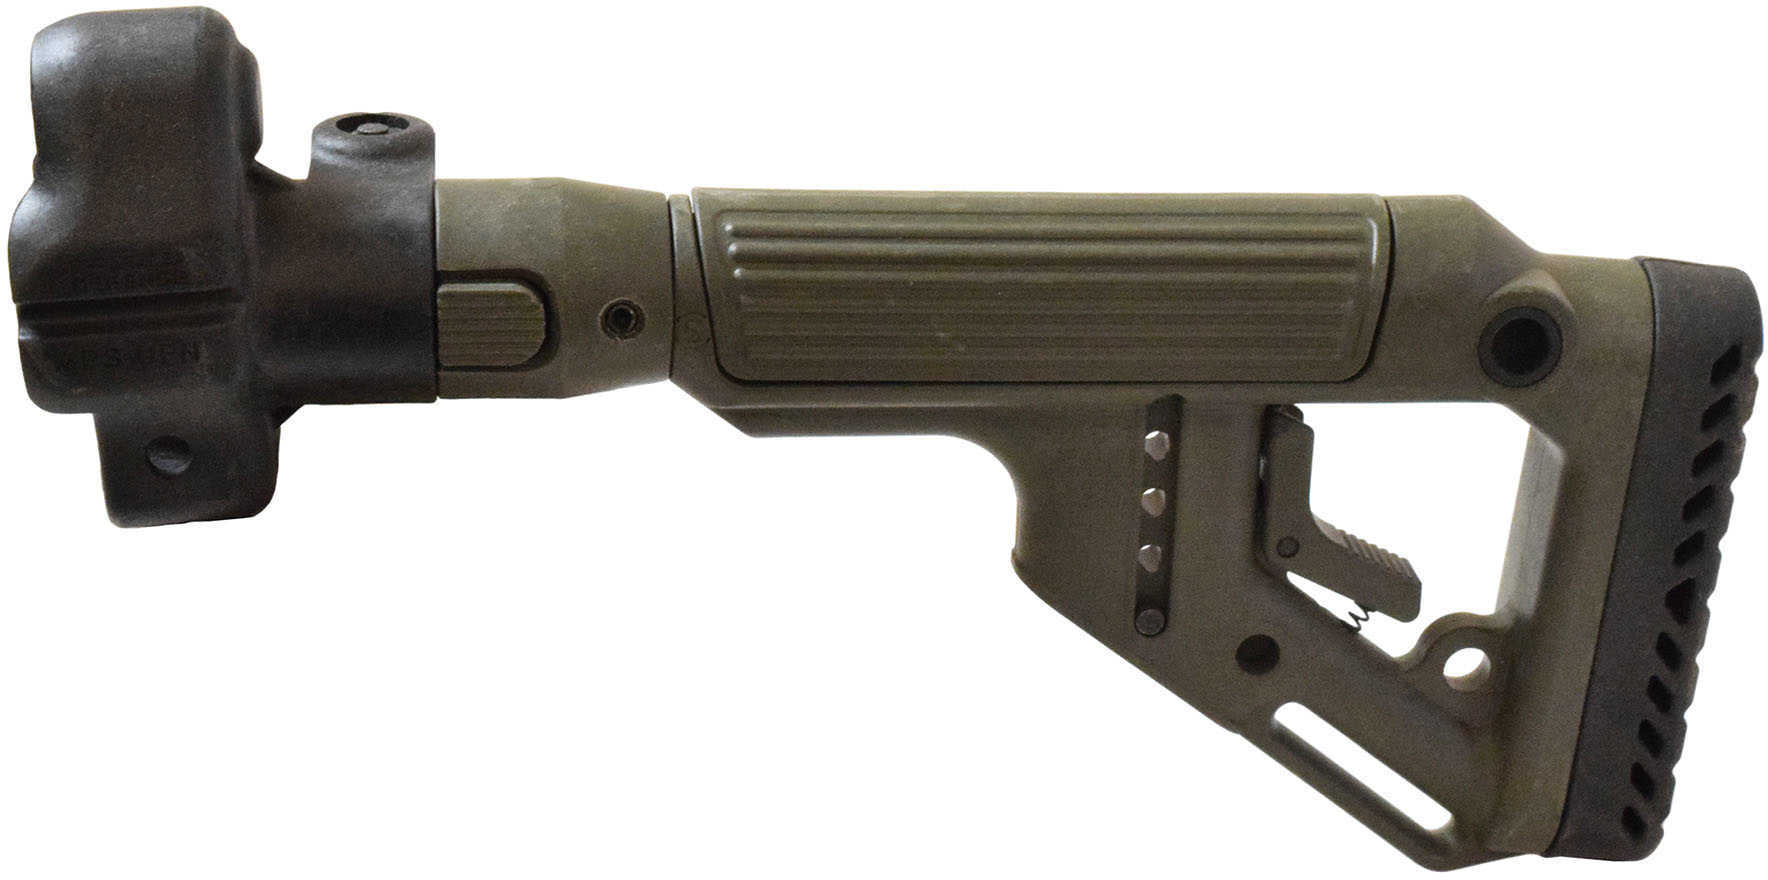 Tactical Folding Buttstock with Cheek Riser MP5, Polymer Lock, Olive Drab Green